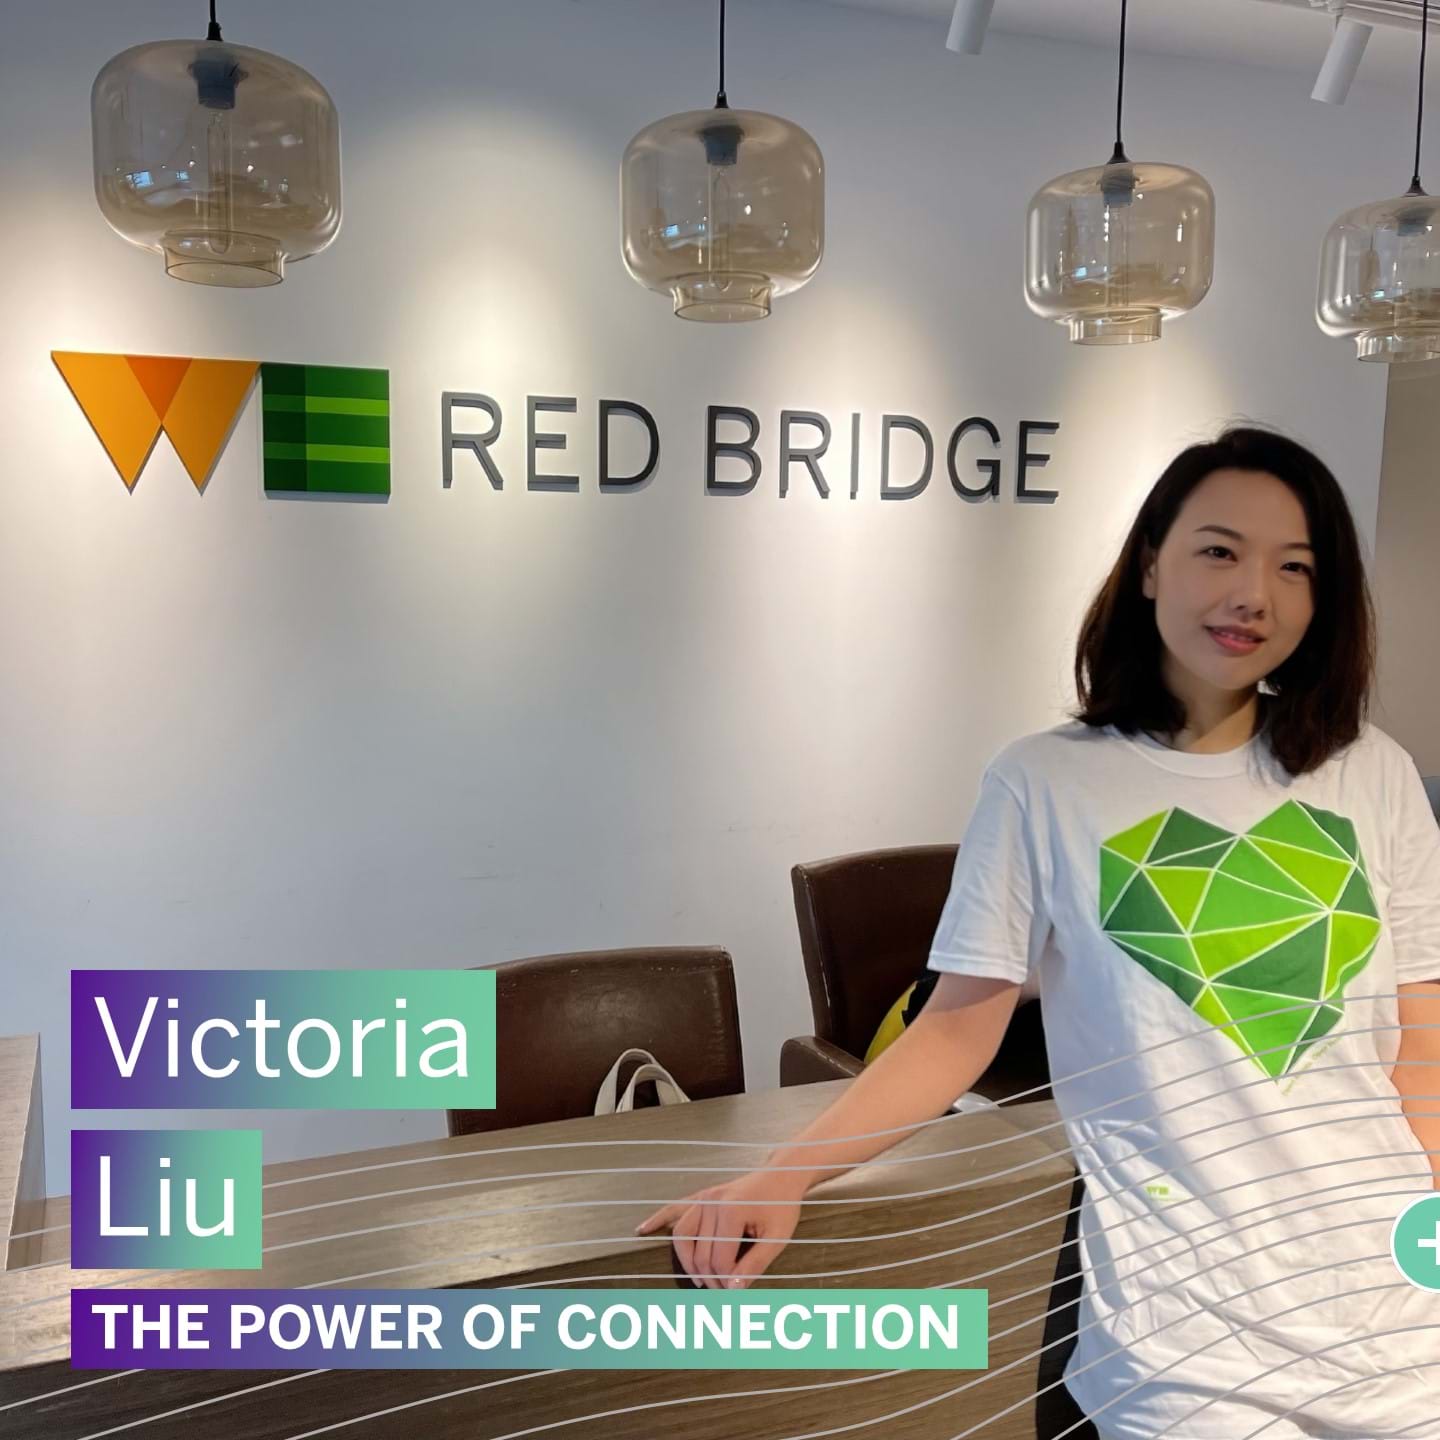 Victoria Liu: The Power of Connection